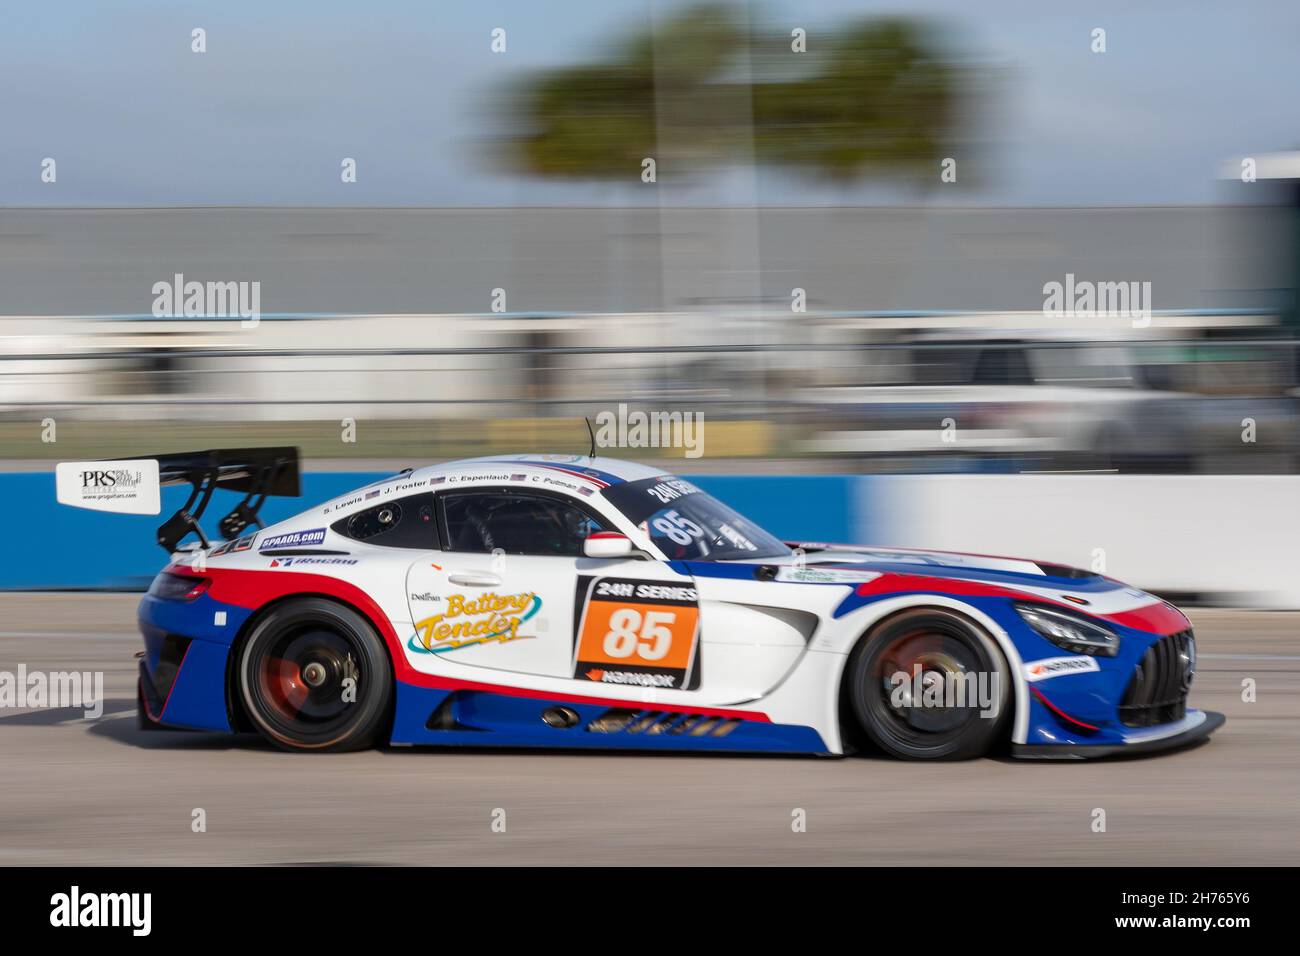 Sebring, USA. 19th Nov, 2021. 85 CP Racing Mercedes-AMG GT3: Charles Putman, Charles Espenlaub, Joe Foster, Shane Lewis during the 24H Series powered by Hankook. Schedule includes USA stops on November 19-21, 2021. Racing cars from the many countries, such as: Germany, USA, France, Nederland, Romania, Denmark, Canada, Spain, Great Britain, Italy; in many different classes: GT4, 991, GTX, GT3, TCR, TCX, P4. (Photo by Yaroslav Sabitov/YES Market Media/Sipa USA) Credit: Sipa USA/Alamy Live News Stock Photo